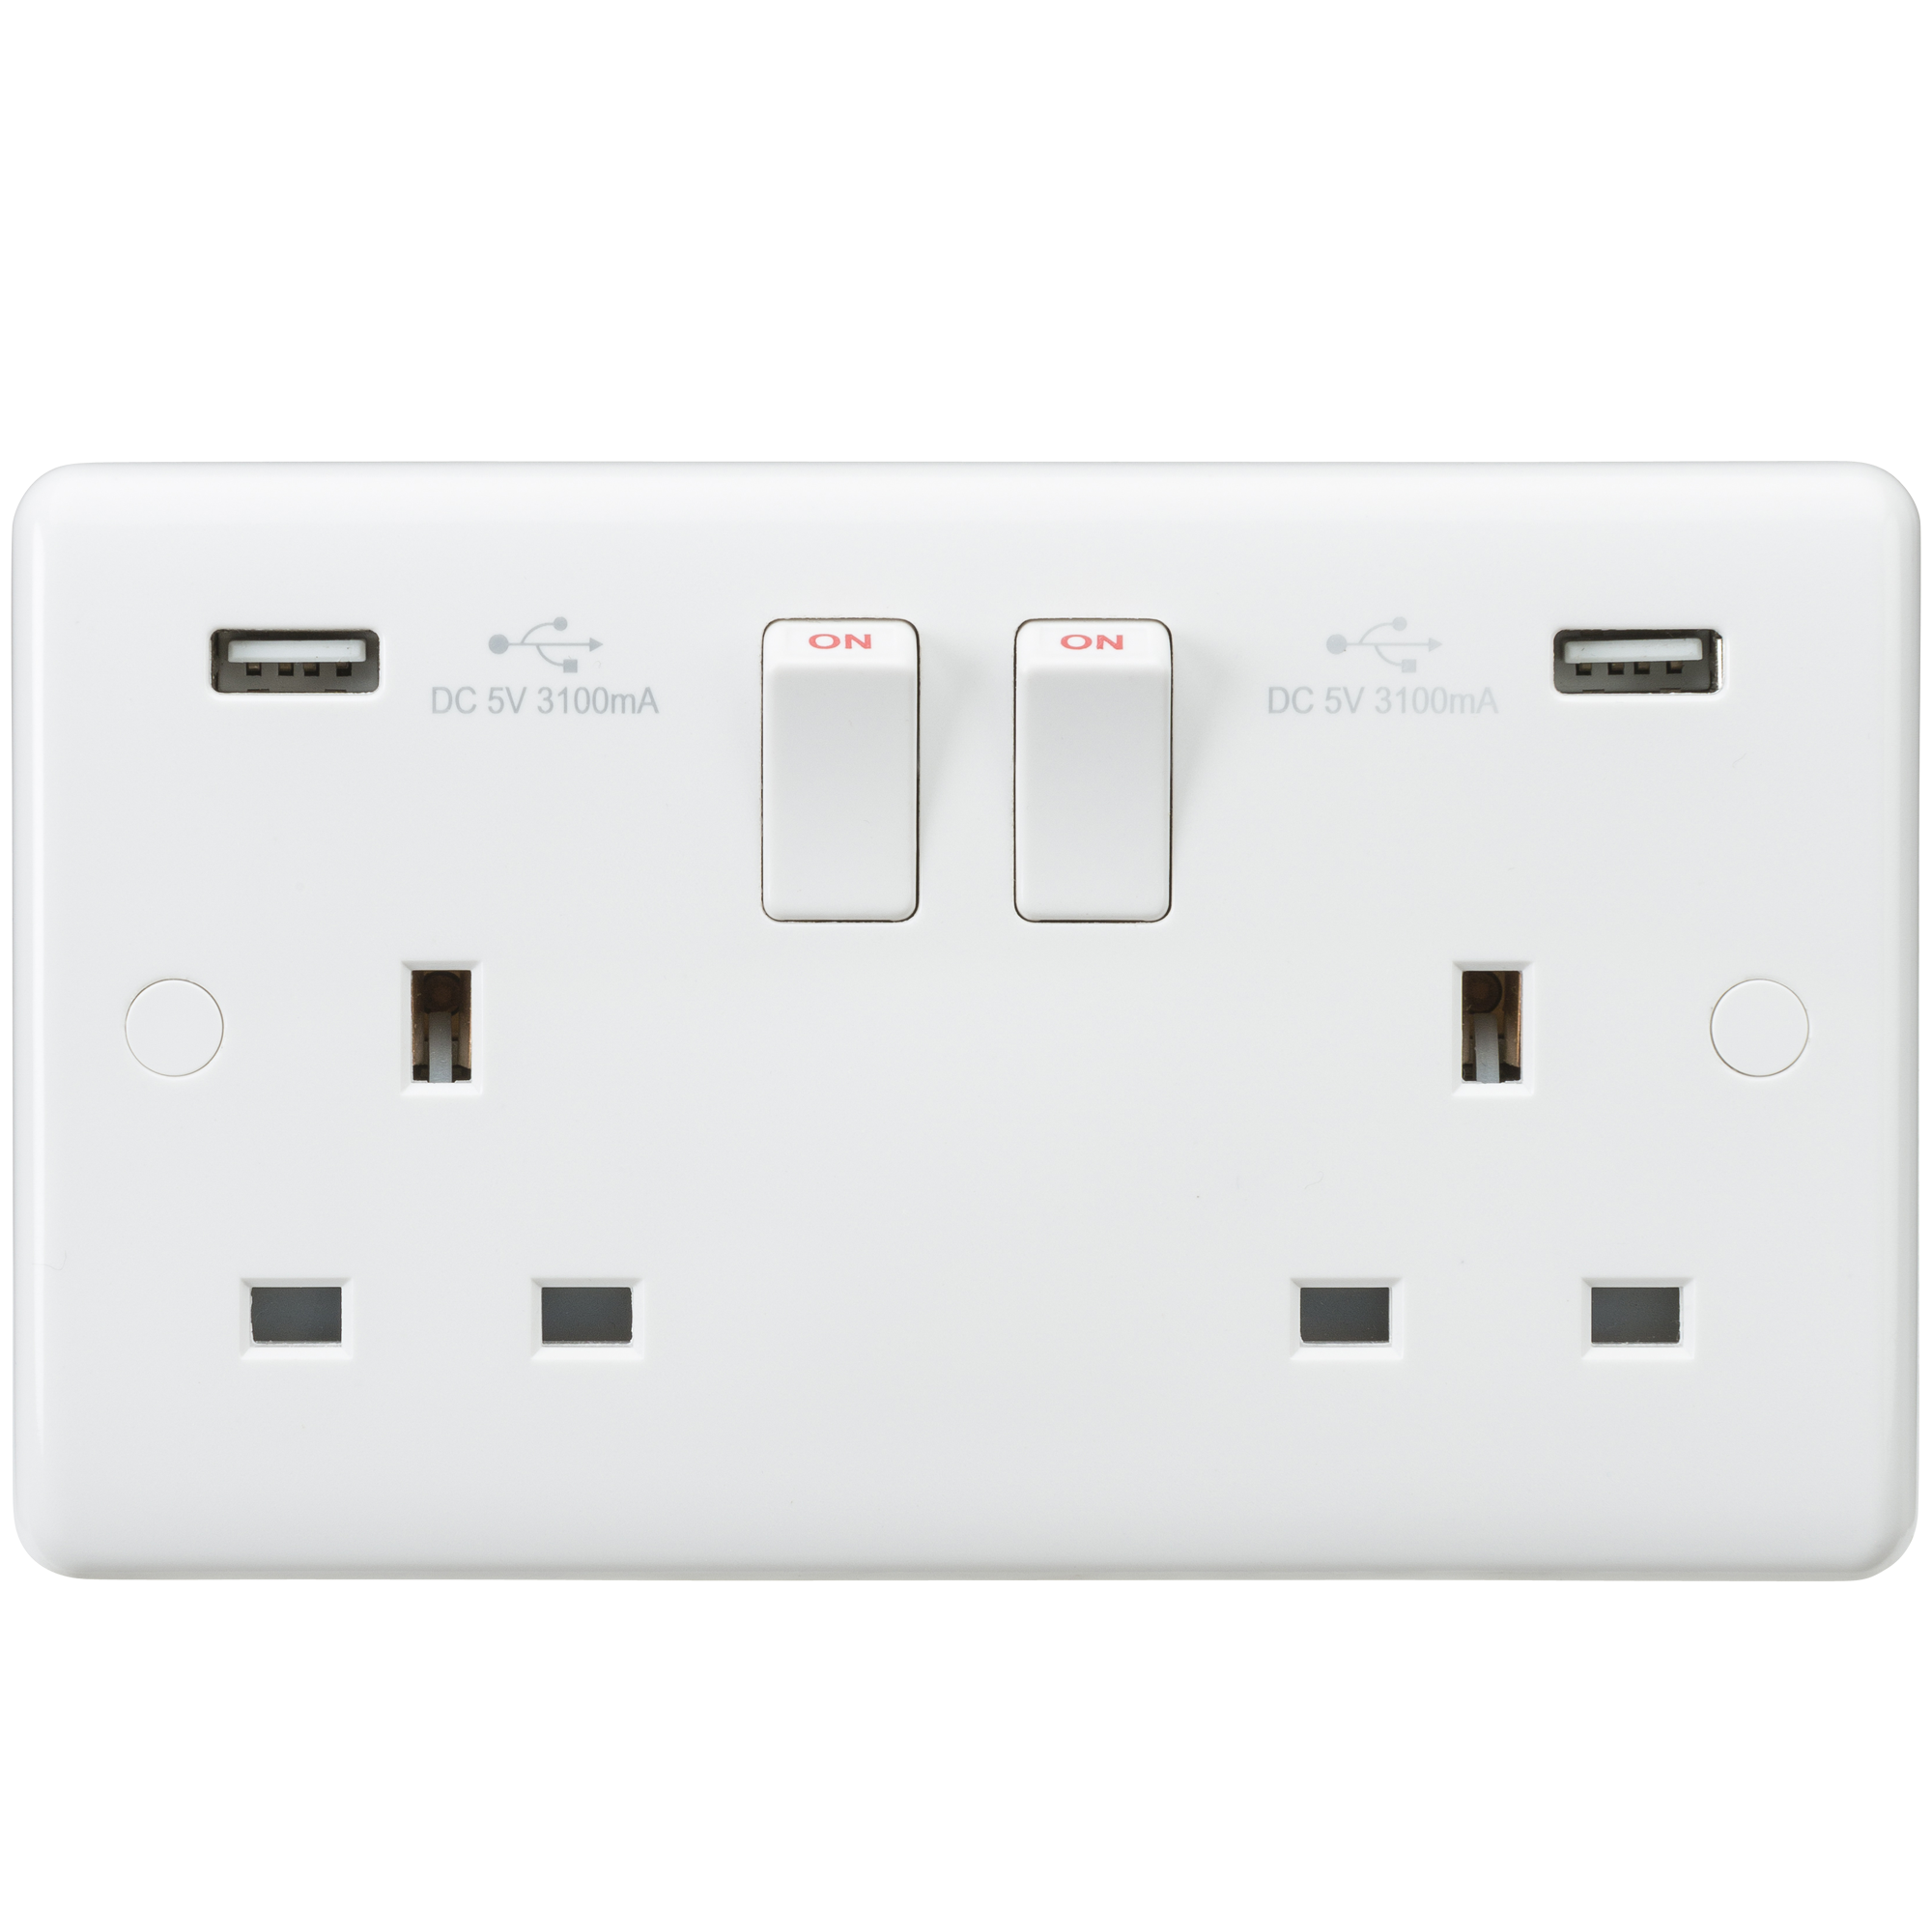 Curved Edge 13A 2G Switched Socket With Dual USB Charger (5V DC 3.1A Shared) - CU9904 